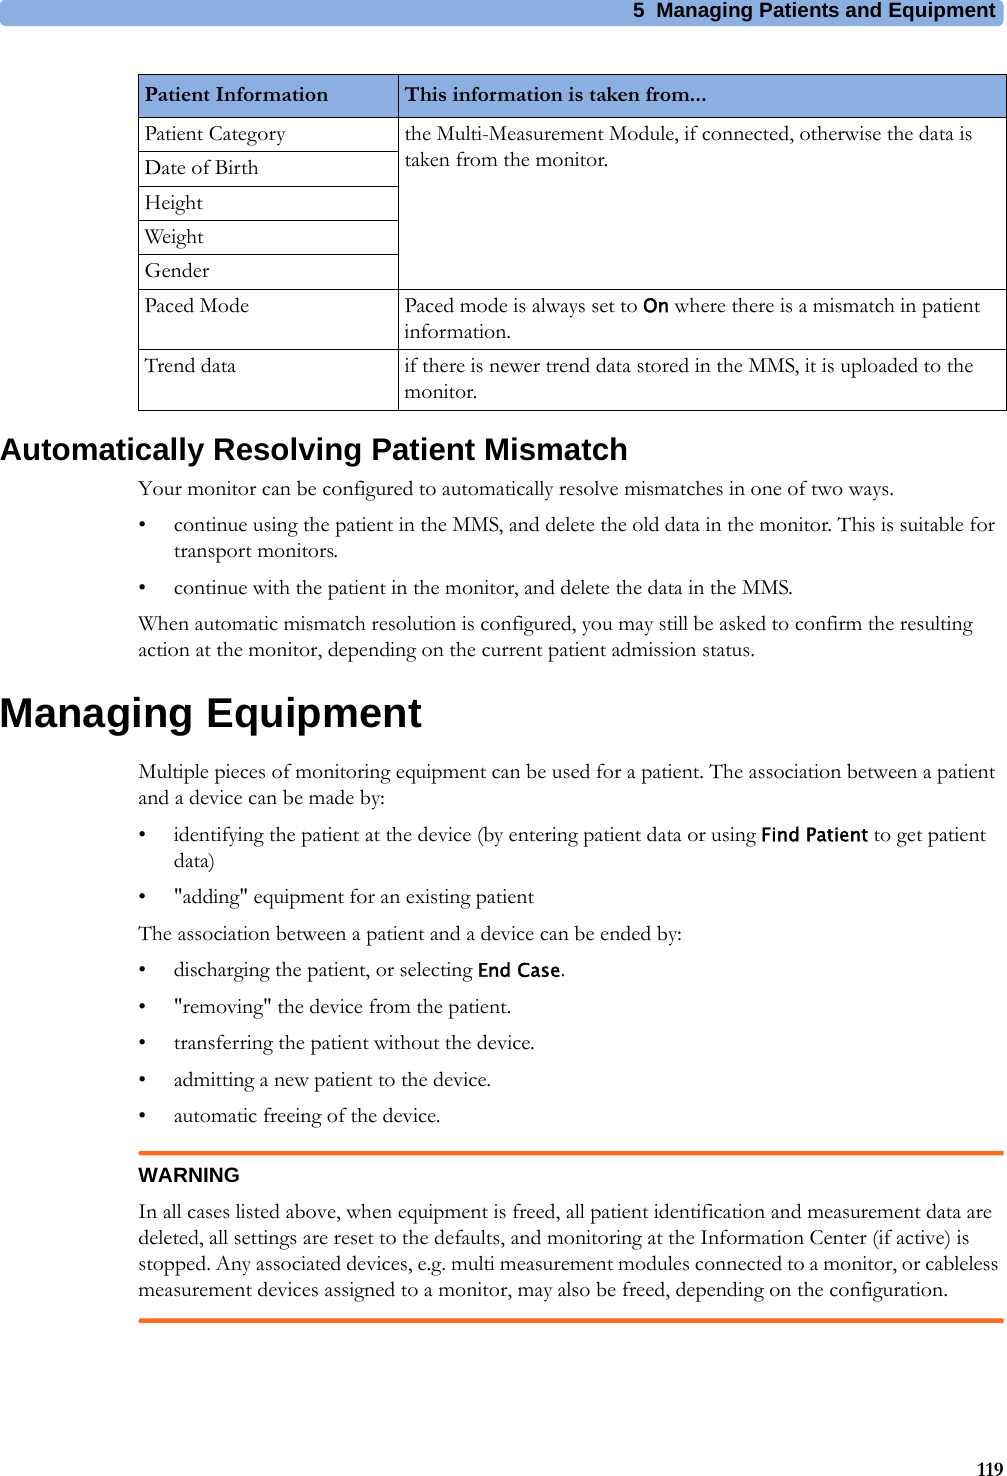 5 Managing Patients and Equipment119Automatically Resolving Patient MismatchYour monitor can be configured to automatically resolve mismatches in one of two ways.• continue using the patient in the MMS, and delete the old data in the monitor. This is suitable for transport monitors.• continue with the patient in the monitor, and delete the data in the MMS.When automatic mismatch resolution is configured, you may still be asked to confirm the resulting action at the monitor, depending on the current patient admission status.Managing EquipmentMultiple pieces of monitoring equipment can be used for a patient. The association between a patient and a device can be made by:• identifying the patient at the device (by entering patient data or using Find Patient to get patient data)• &quot;adding&quot; equipment for an existing patientThe association between a patient and a device can be ended by:• discharging the patient, or selecting End Case.• &quot;removing&quot; the device from the patient.• transferring the patient without the device.• admitting a new patient to the device.• automatic freeing of the device.WARNINGIn all cases listed above, when equipment is freed, all patient identification and measurement data are deleted, all settings are reset to the defaults, and monitoring at the Information Center (if active) is stopped. Any associated devices, e.g. multi measurement modules connected to a monitor, or cableless measurement devices assigned to a monitor, may also be freed, depending on the configuration.Patient Category the Multi-Measurement Module, if connected, otherwise the data is taken from the monitor.Date of BirthHeightWeightGenderPaced Mode Paced mode is always set to On where there is a mismatch in patient information.Trend data if there is newer trend data stored in the MMS, it is uploaded to the monitor.Patient Information This information is taken from...